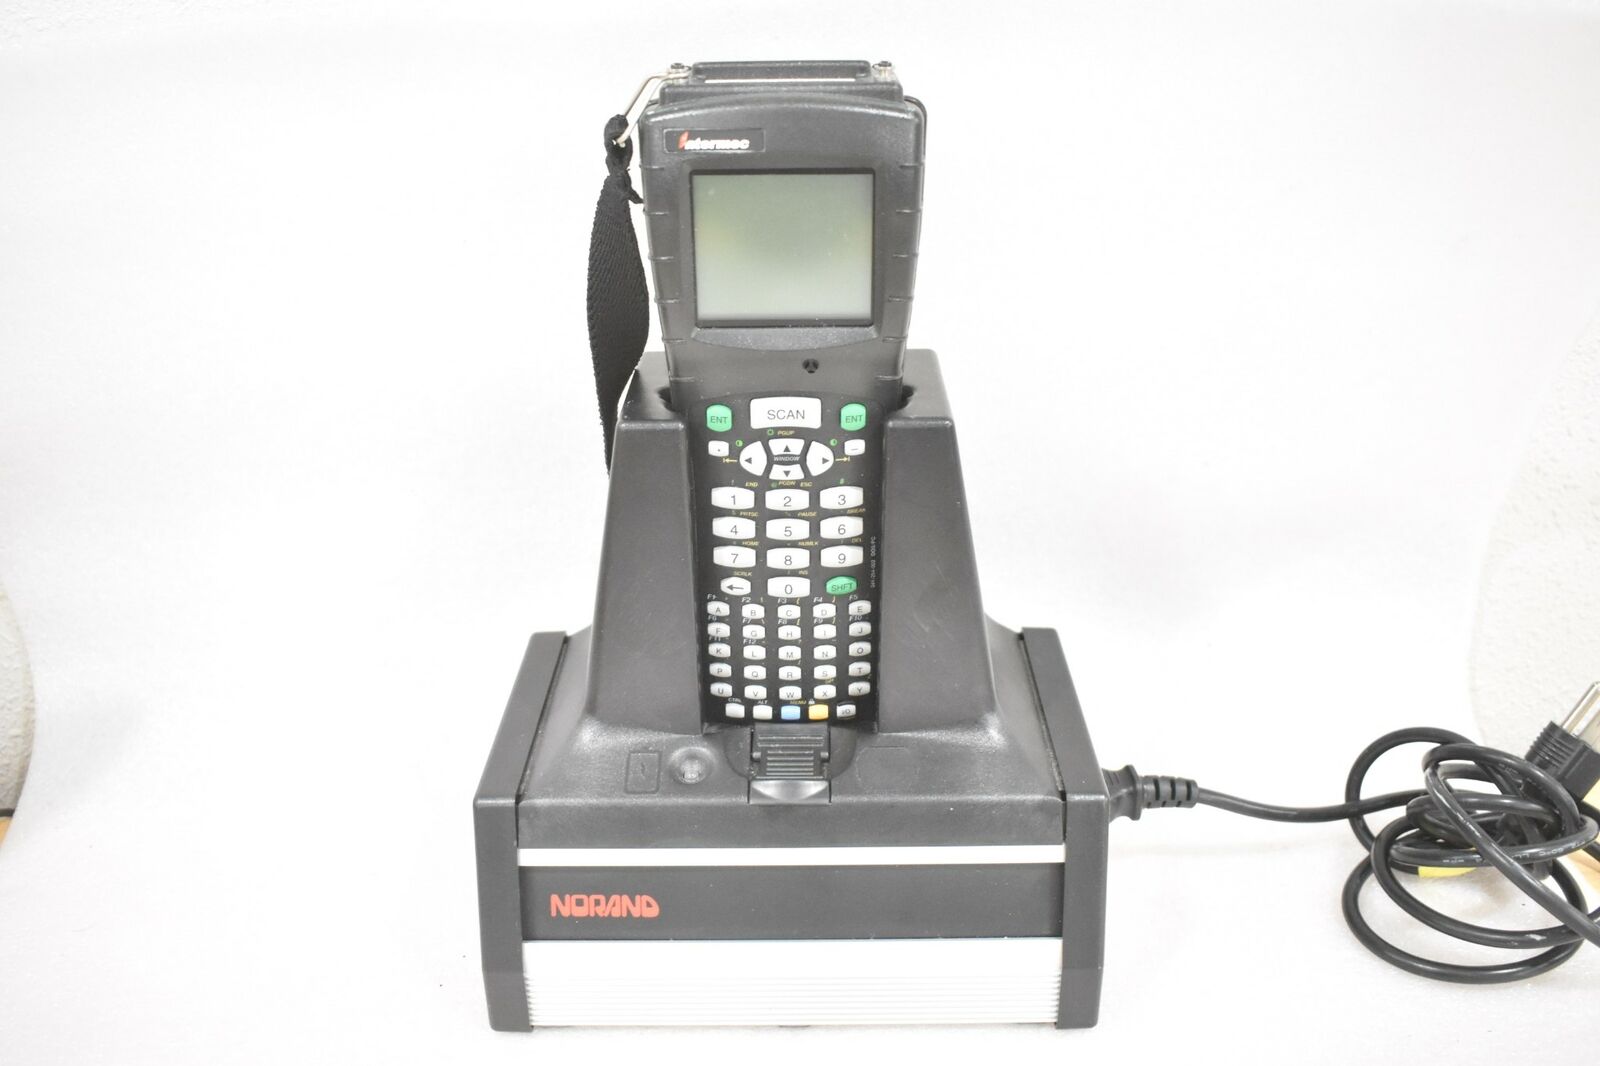 INTERMEC MODEL 6400 BARCODE SCANNER WITH PEN*KEY 6400 SINGLE DOCK CHARGER